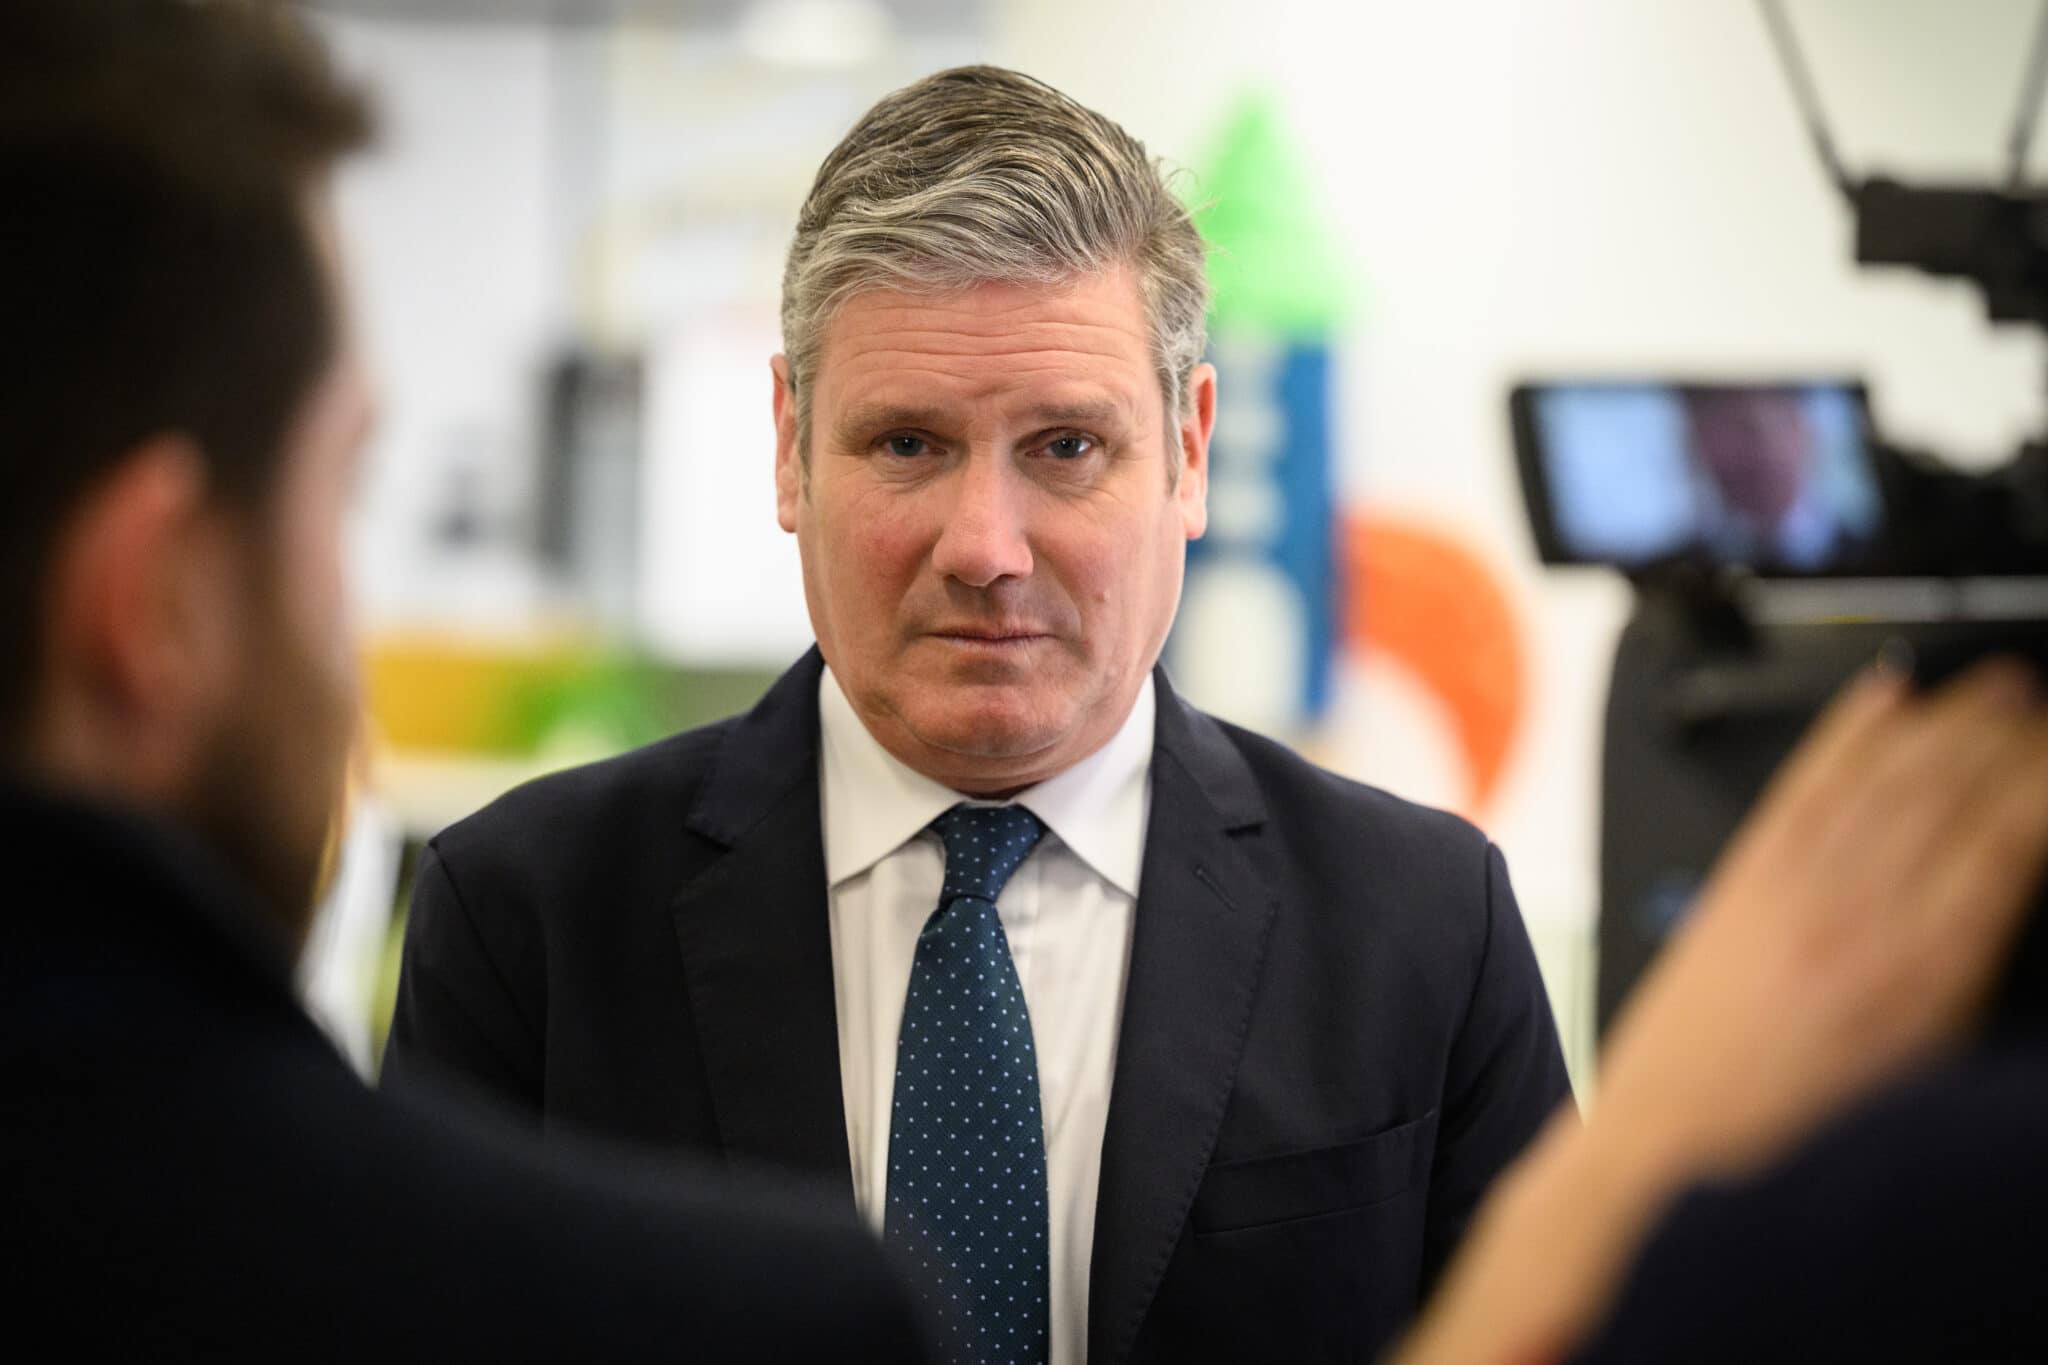 Labour Party leader Keir Starmer speaks to the media